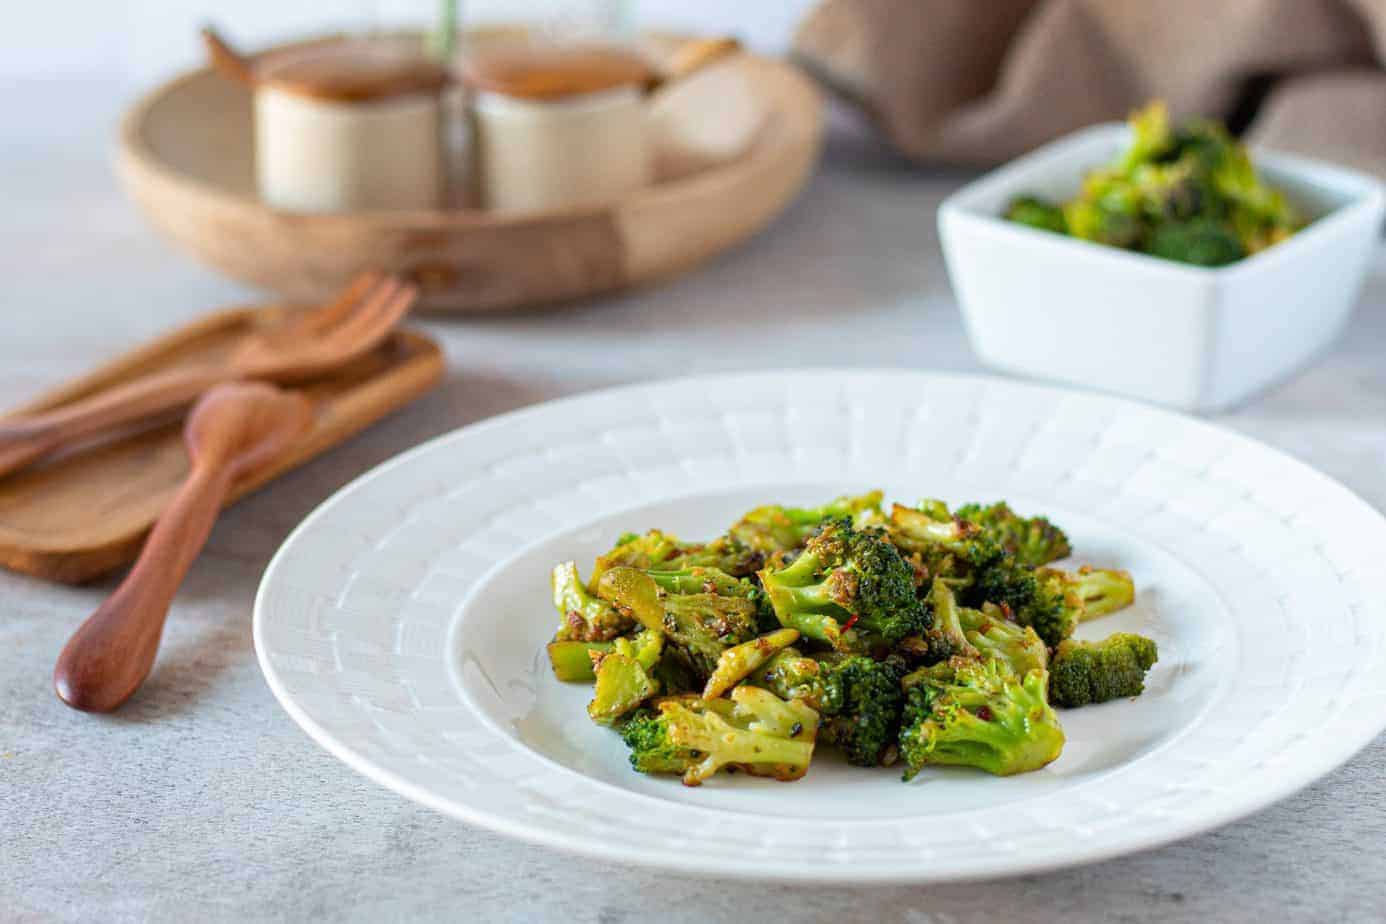 Low-Carb Spicy Roasted Broccoli